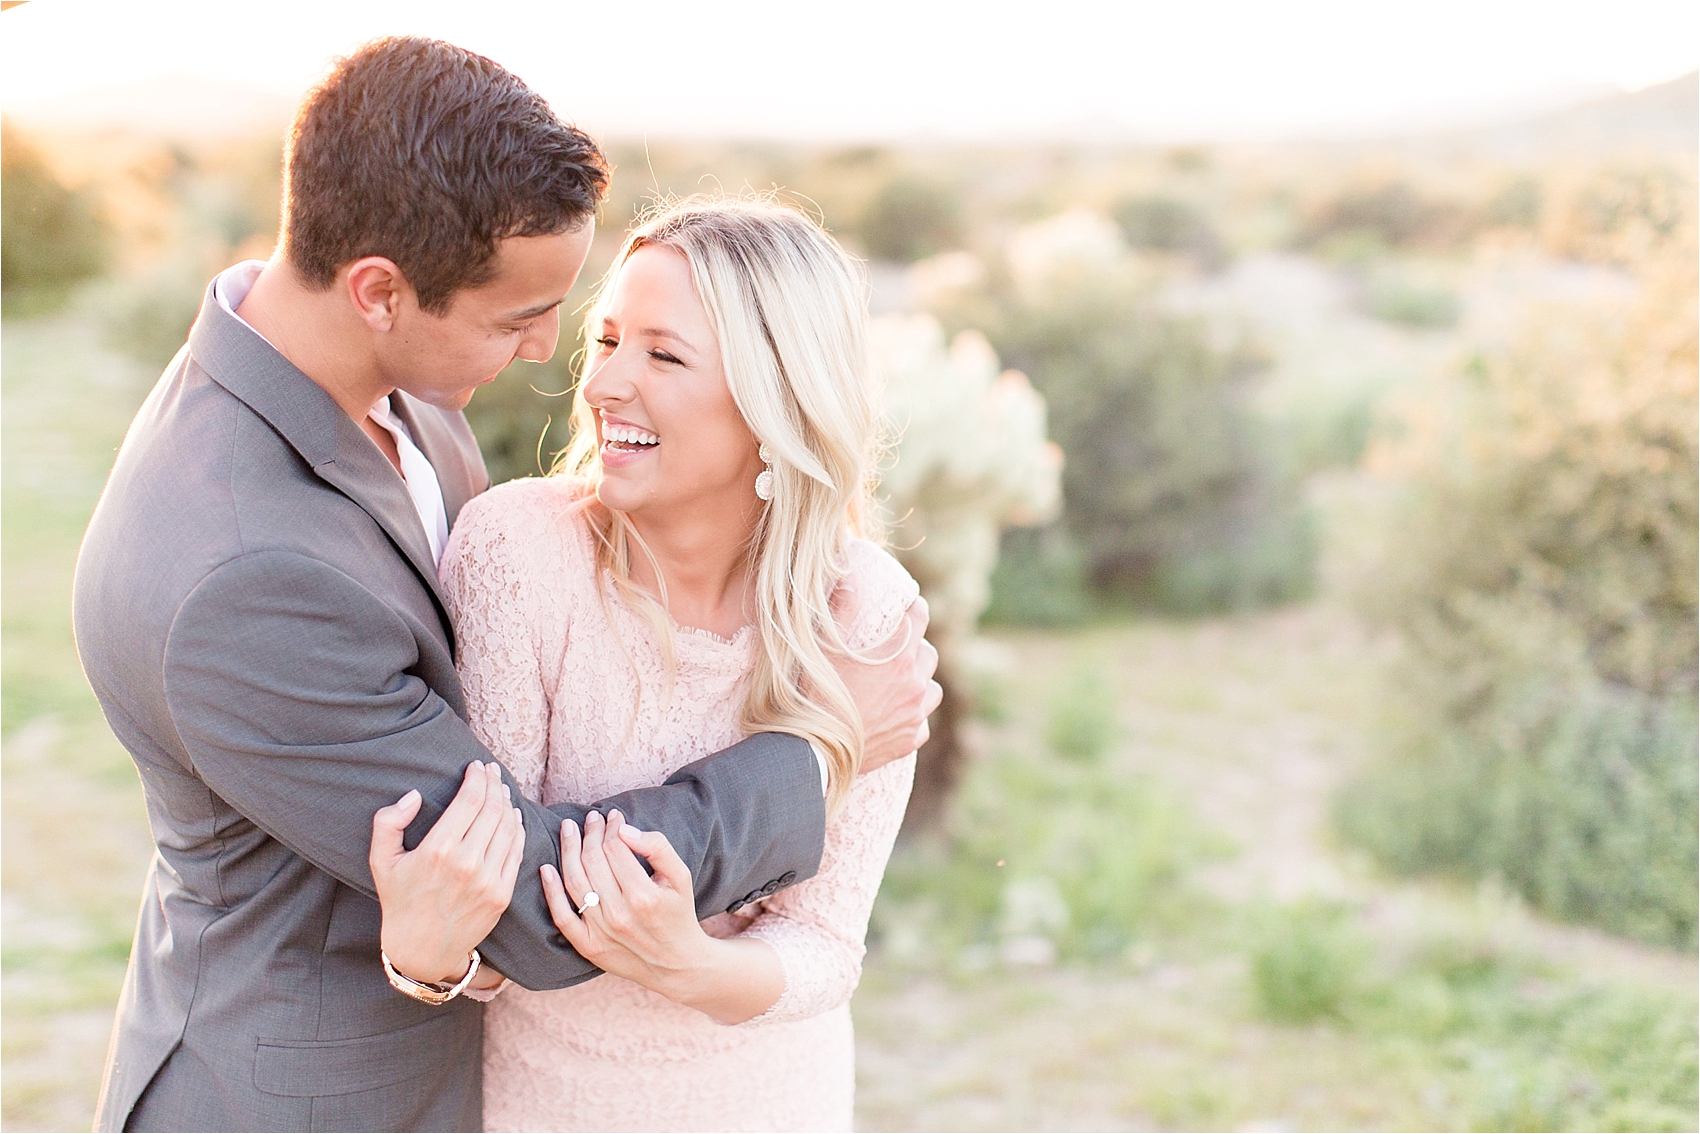 Dreamy engagement session in the desert